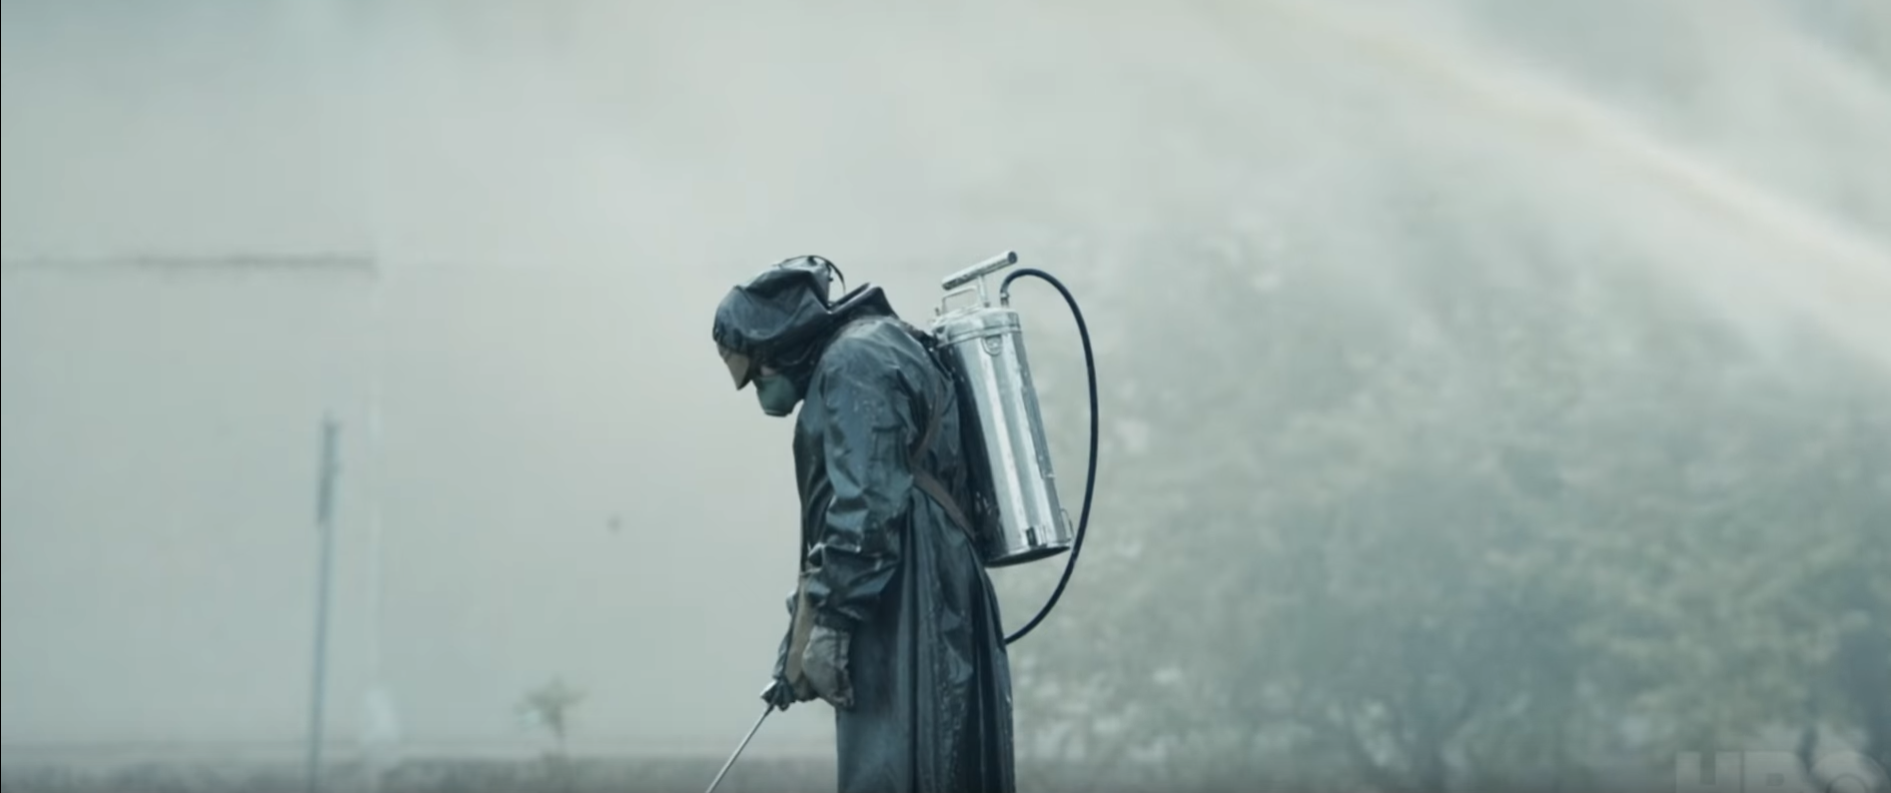 HBO's Chernobyl wins fans in Russia